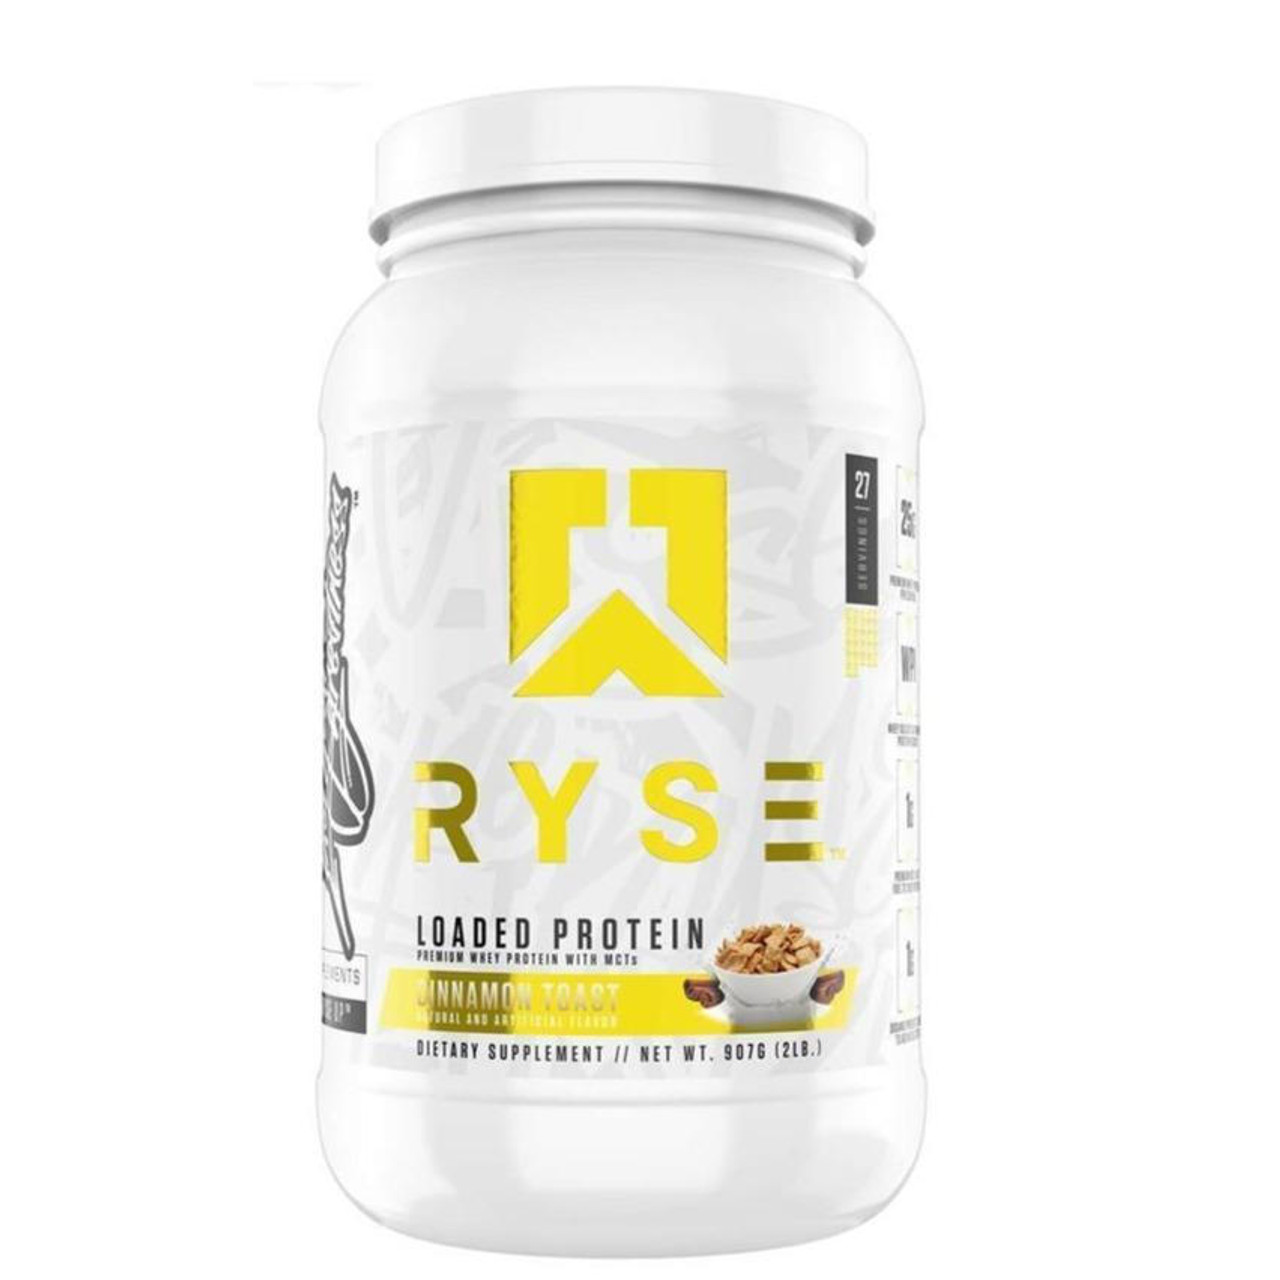 https://cdn11.bigcommerce.com/s-2wcupekyn6/images/stencil/1280x1280/products/7486/22785/ryse-loaded-protein-2lb-cinnamon-crunch_2000x_6050e537-aa1d-4129-95c3-e40f2c8b3efc__31702.1702141140.jpg?c=1&imbypass=on